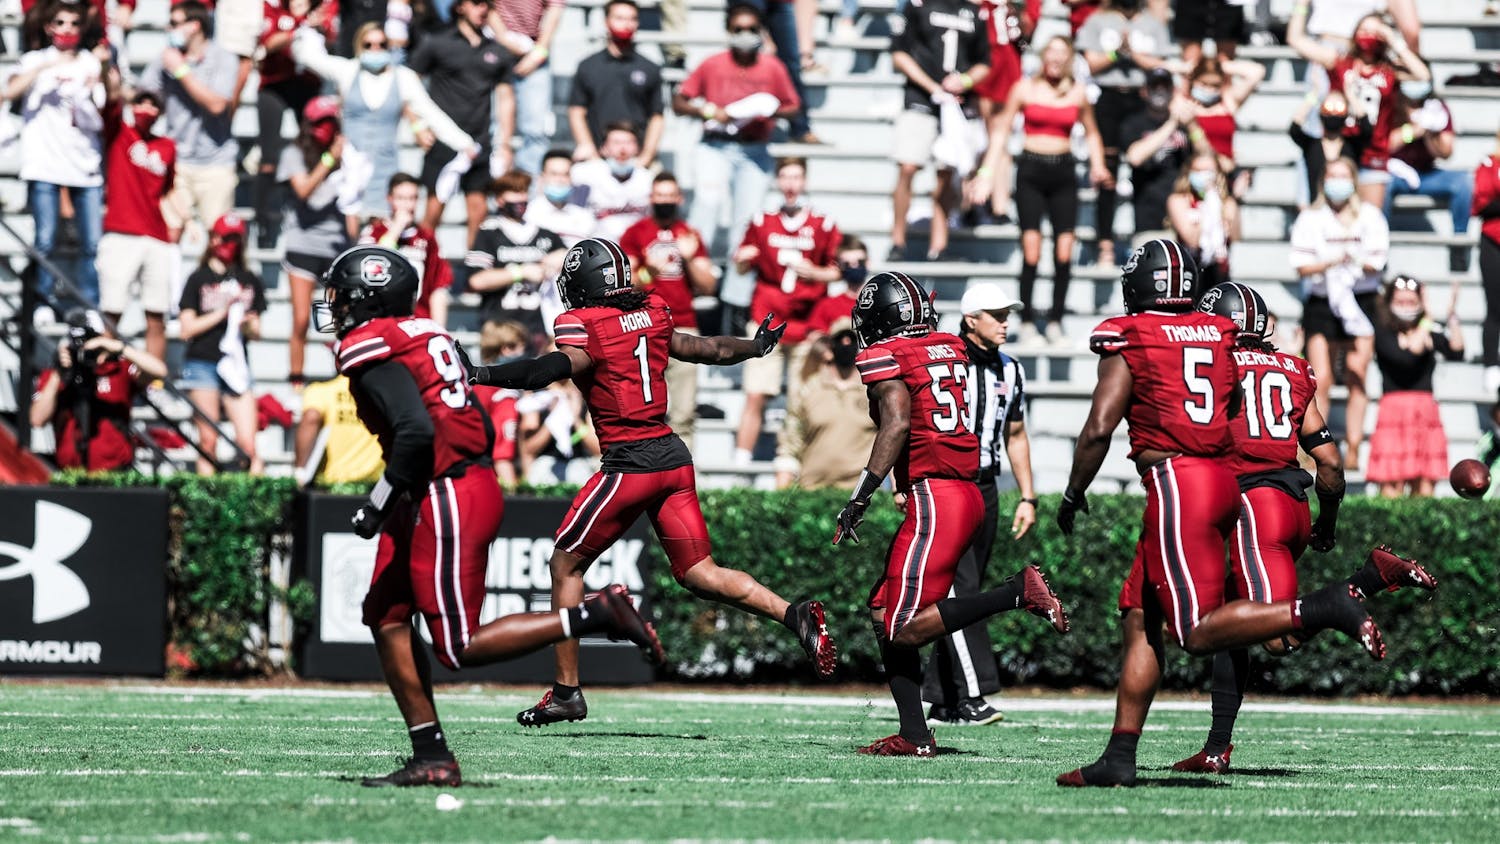 Gamecock defensive players celebrate during the game against the Auburn Tigers. The Gamecocks won 30-22 at home against the Tigers on Saturday, Oct. 17.